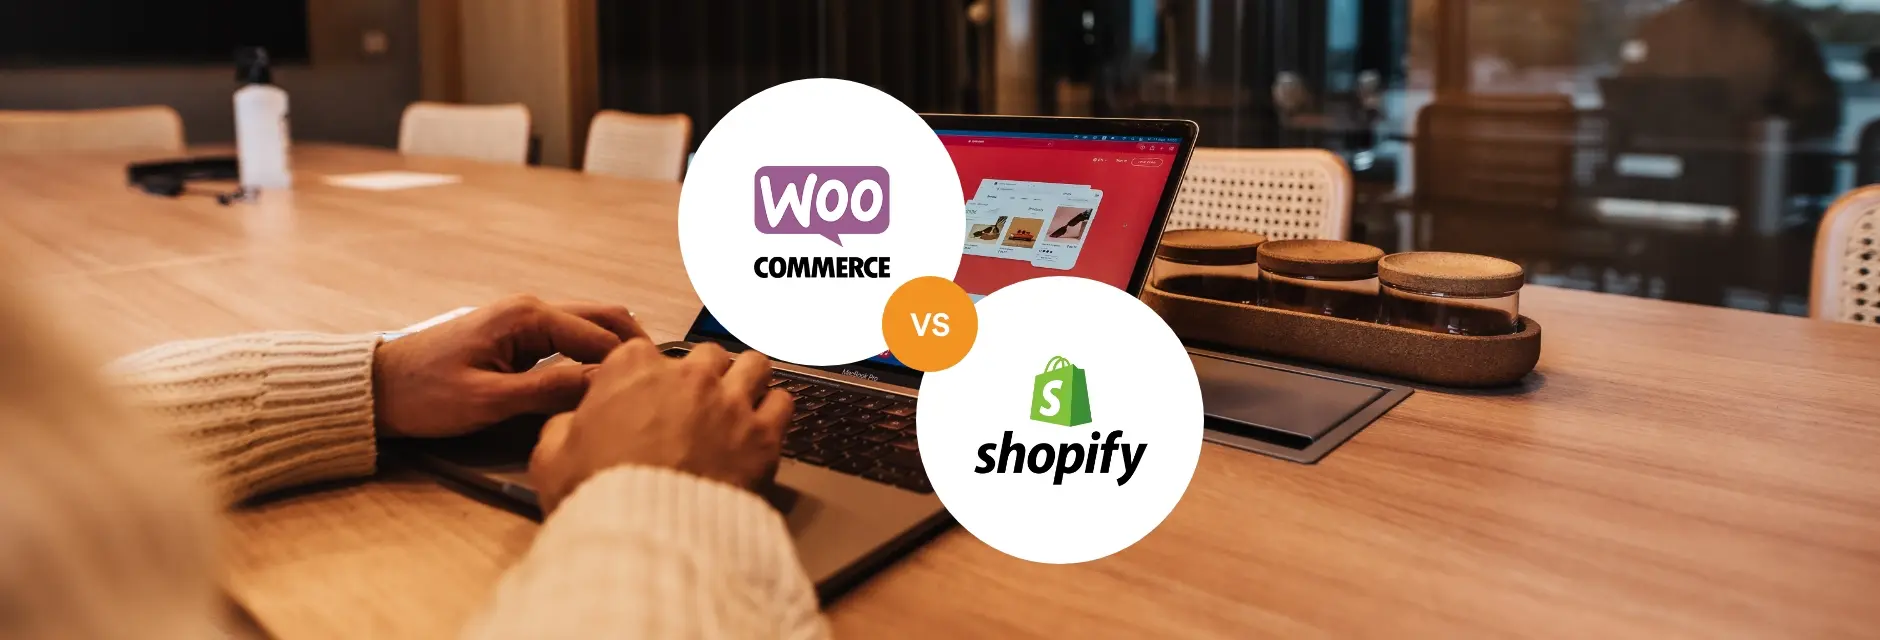 WooCommerce vs. Shopify: A Comprehensive Comparison of Pros and Cons